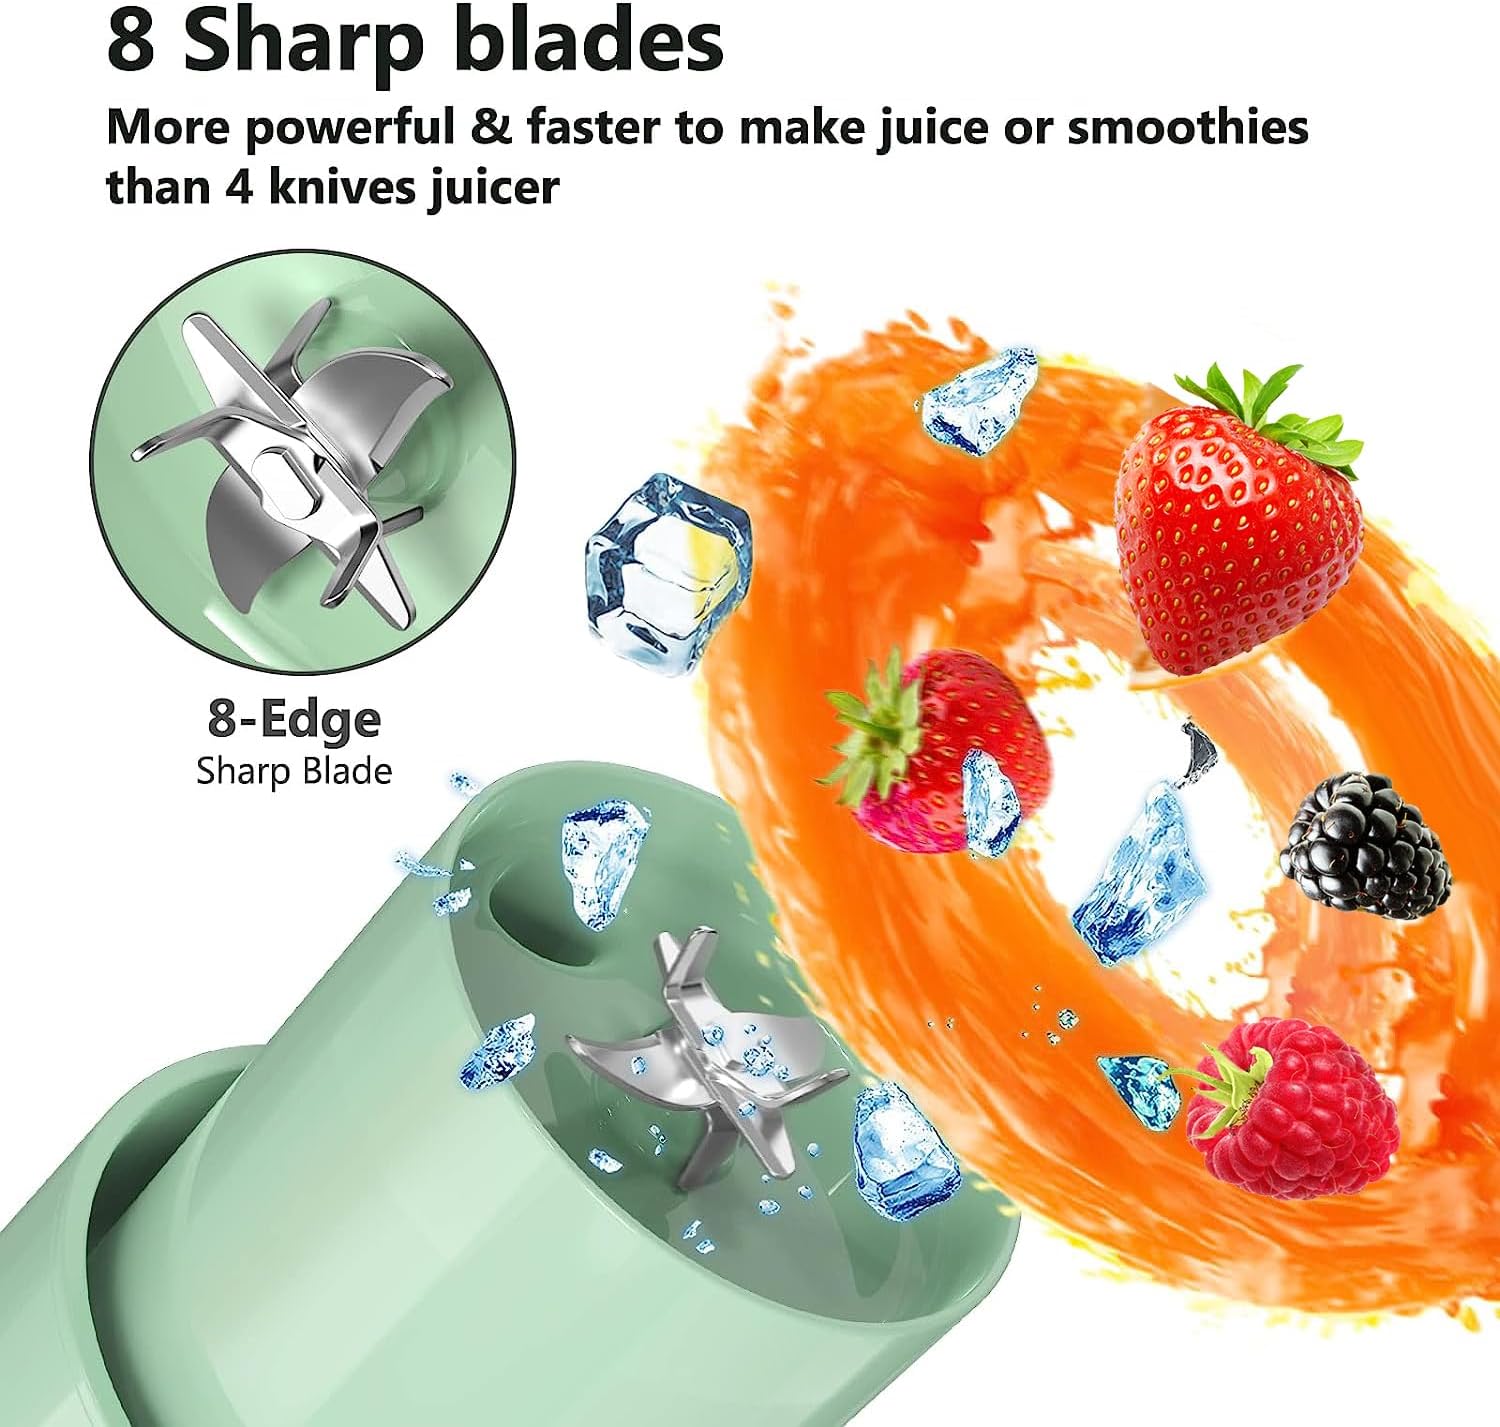 Effortless Smoothies Anywhere: Portable Blender with Ice-Crushing Power, 8 Blades, and Easy Cleaning - Includes Charger, Straw, and Cleaning Brush!